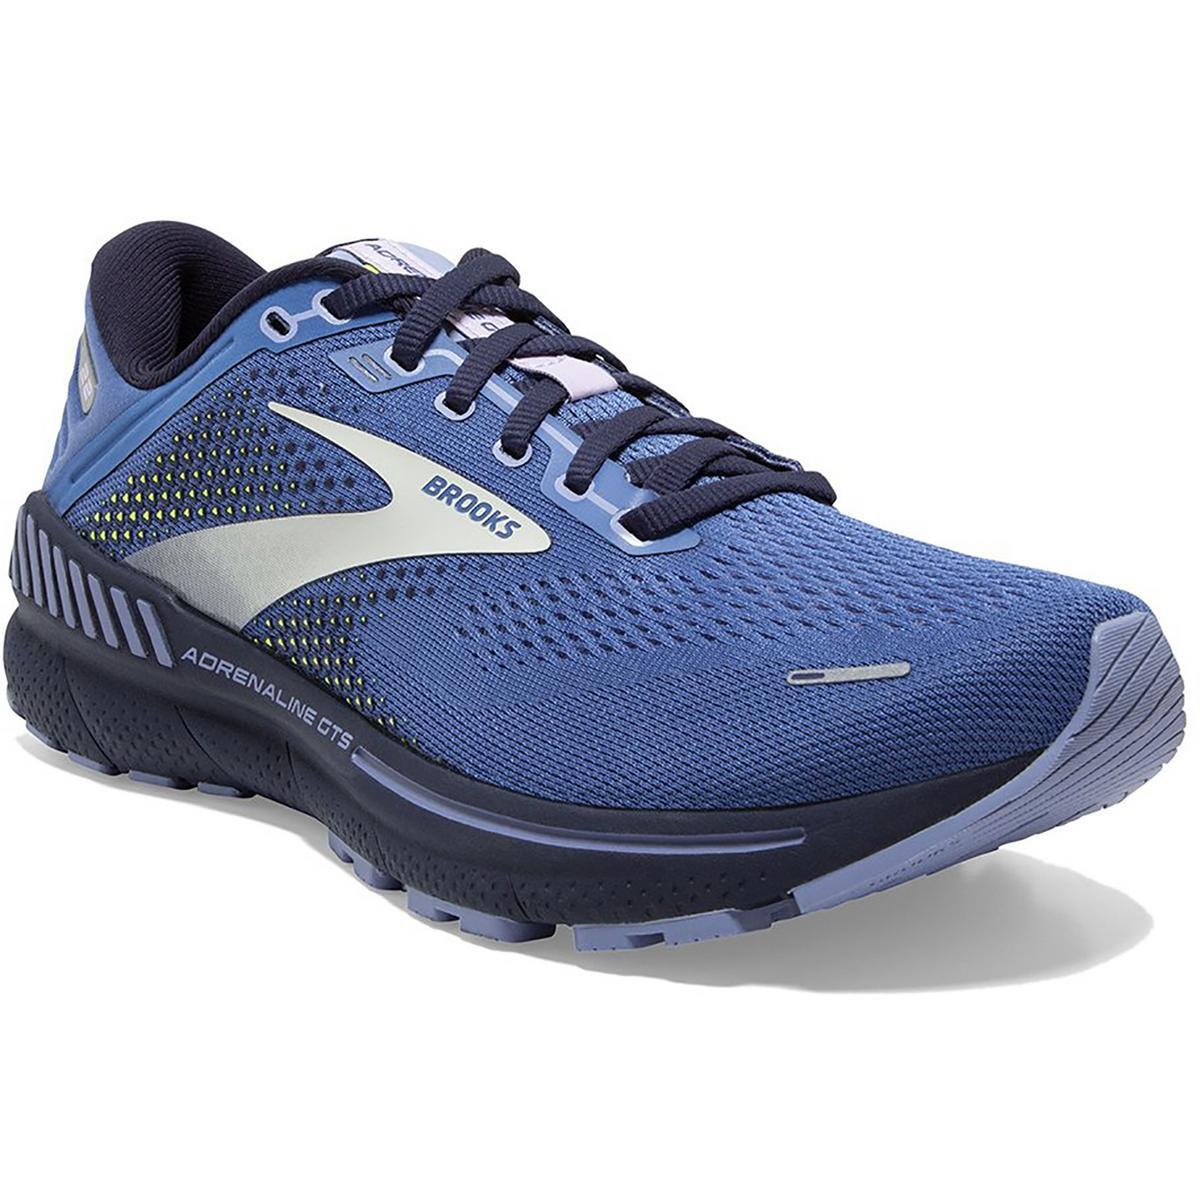 Brooks Womens Adrenaline Gts 22 Athletic and Training Shoes Sneakers Bhfo 7537 Blue/Purple/Nightlife